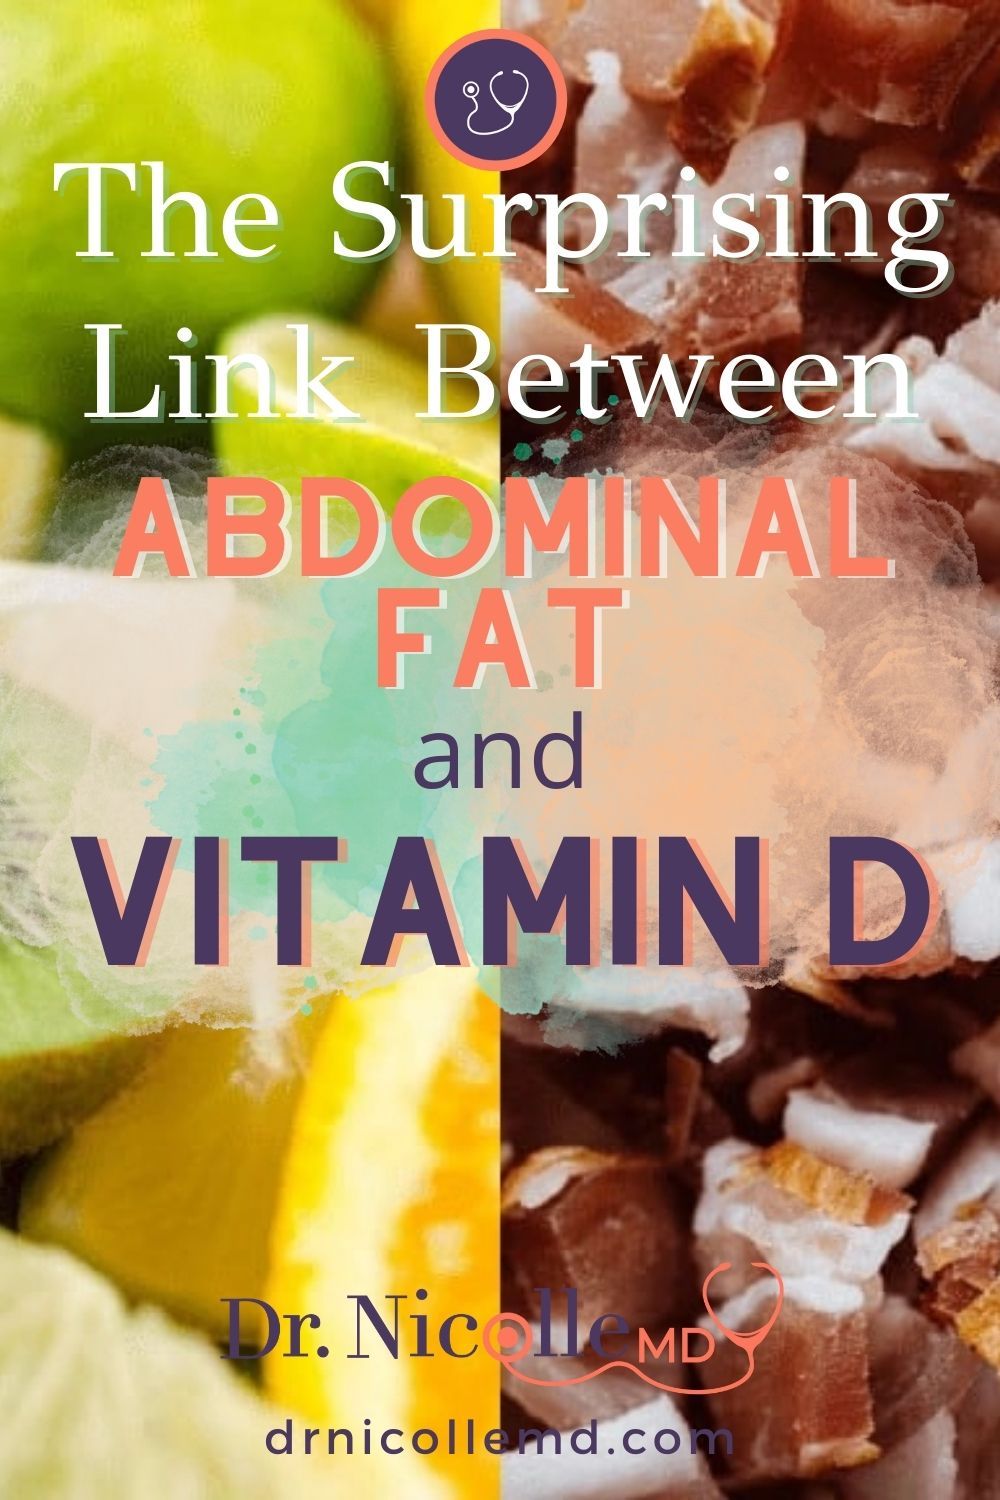 The Surprising Link Between Abdominal Fat and Vitamin D